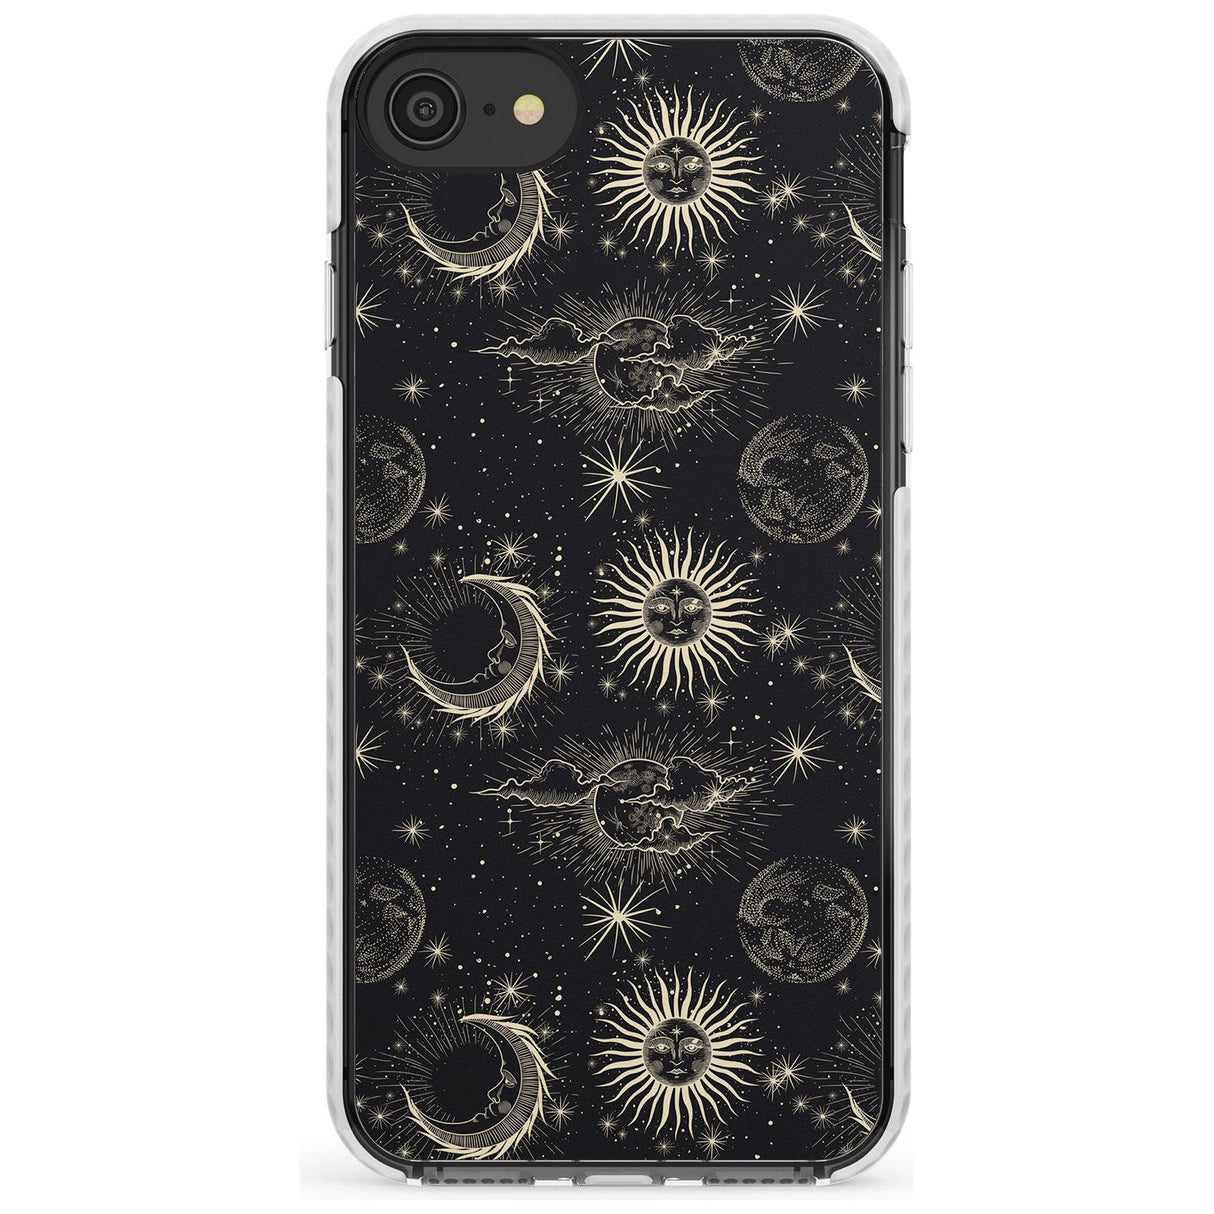 Large Suns, Moons & Clouds Slim TPU Phone Case for iPhone SE 8 7 Plus